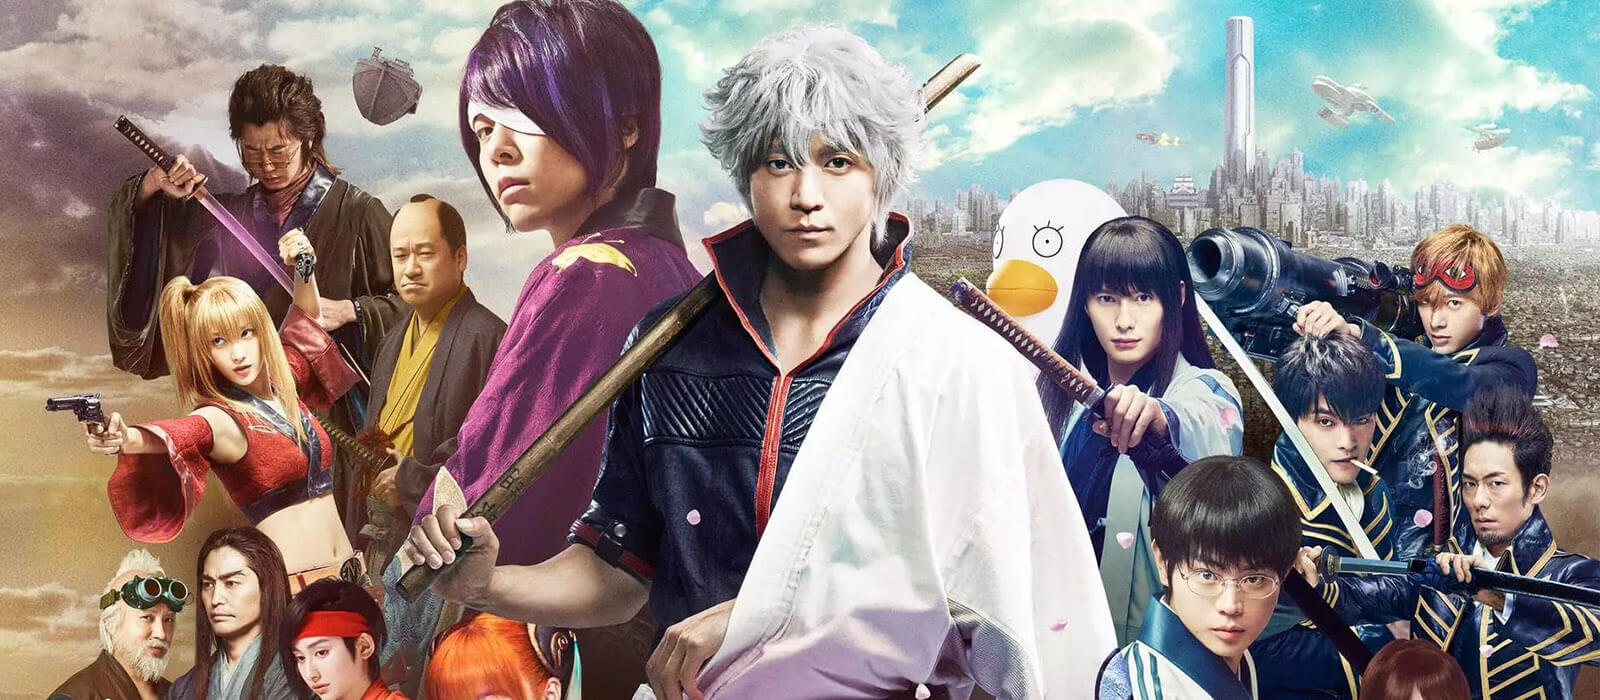 Promo poster for Gintama live-action